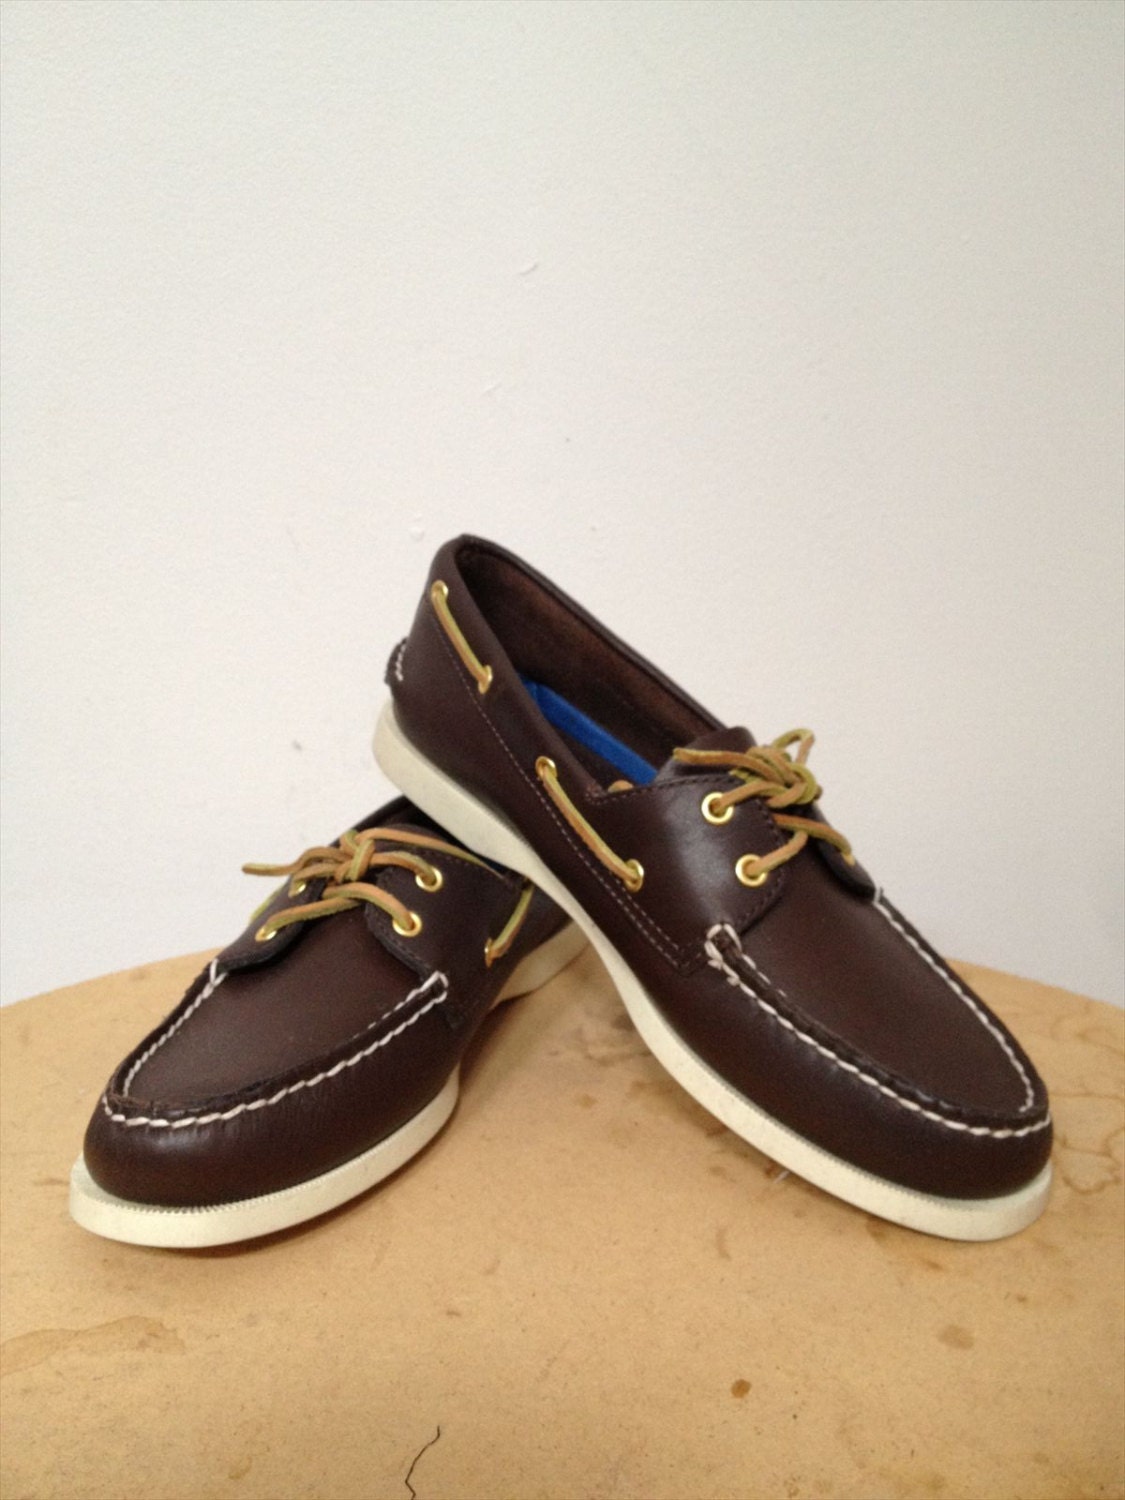 Sperry Top-Sider Dark Brown Boat Docker Shoes Womens size9M